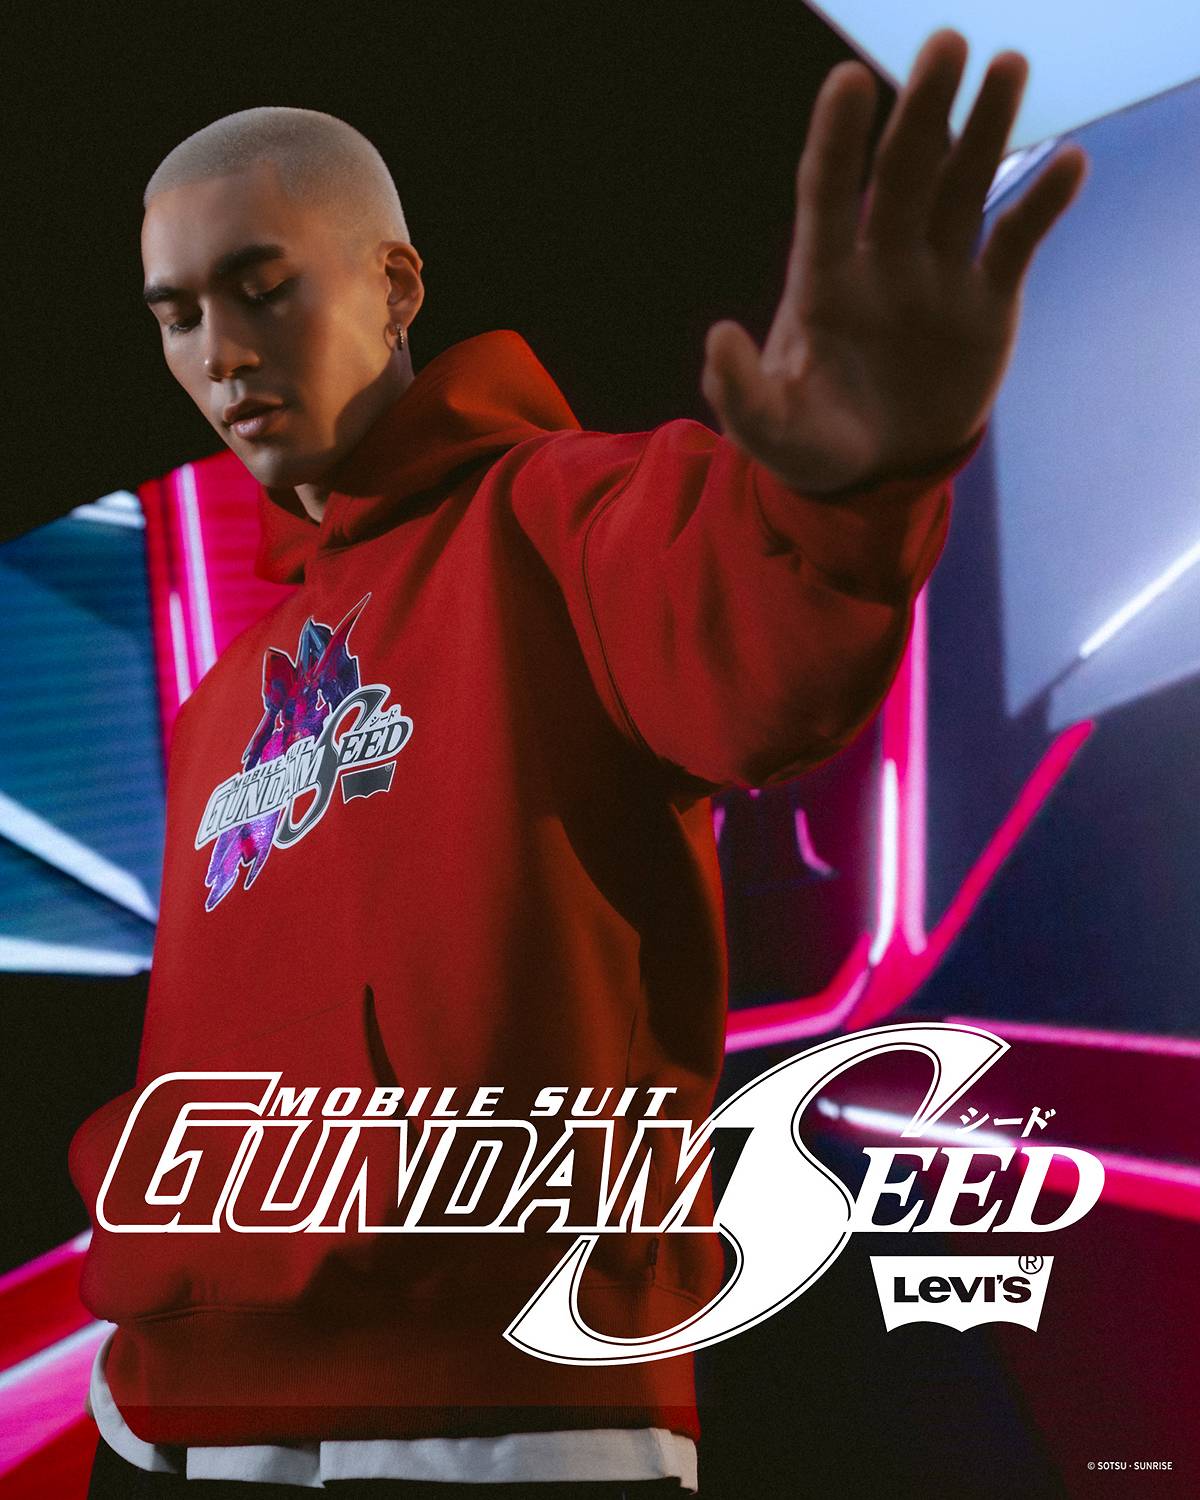 Image of a model reaching out to the camera, wearing the red Levi's x Gundam SEED collaboration hoodie.